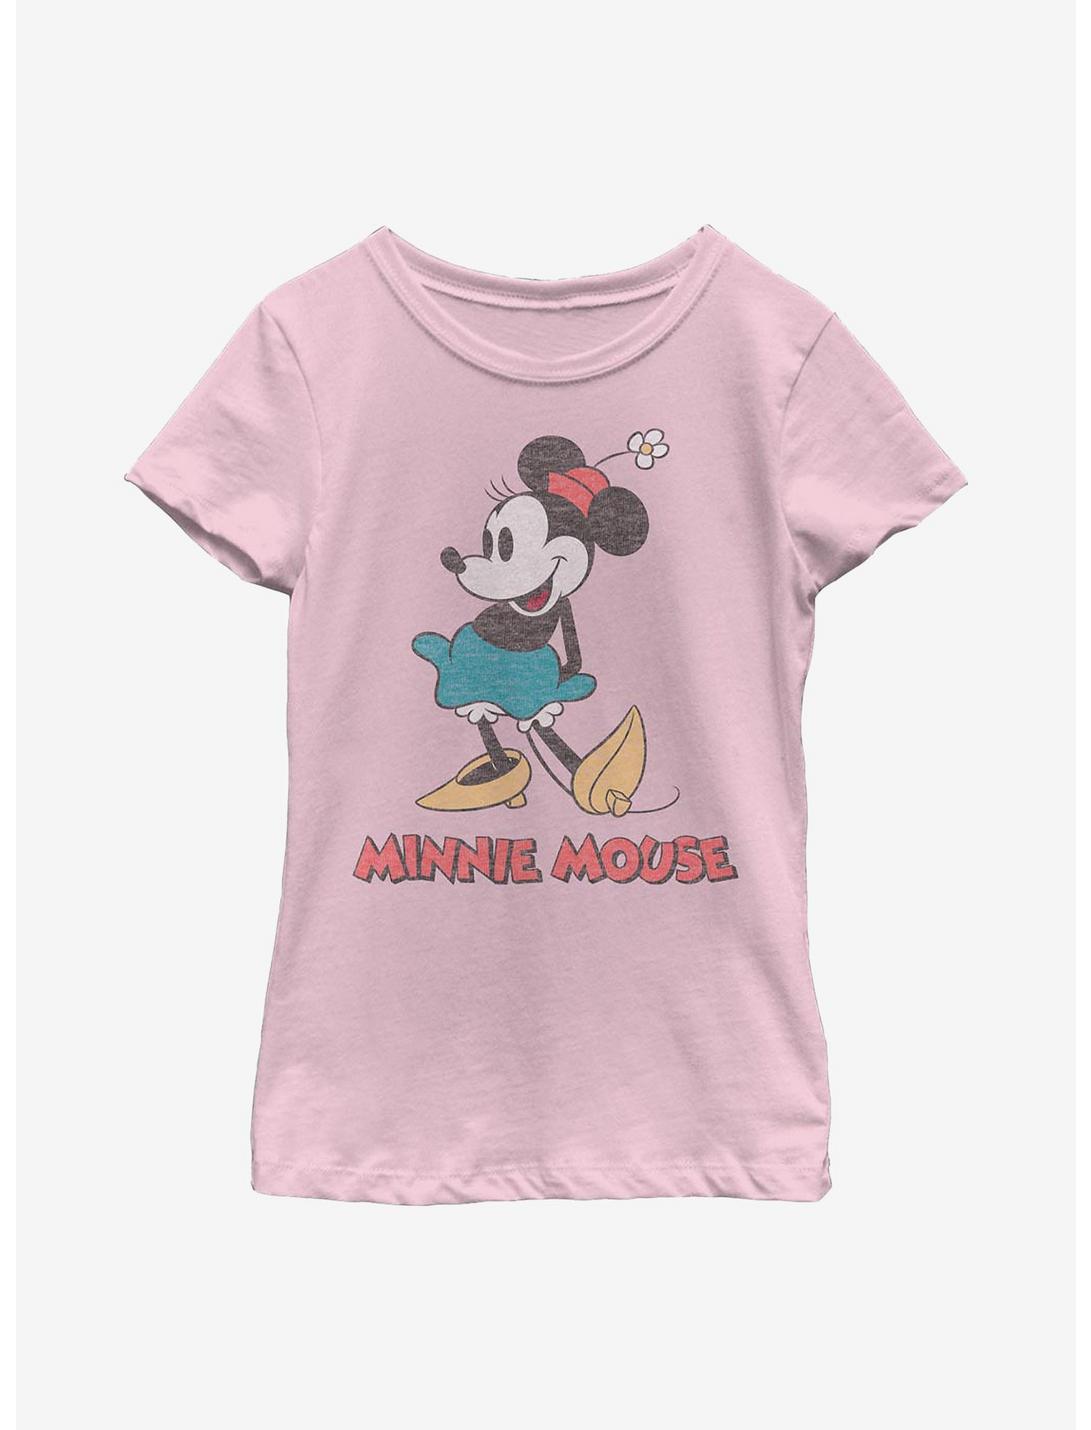 Disney Minnie Mouse Vintage Minnie Youth Girls T-Shirt, PINK, hi-res